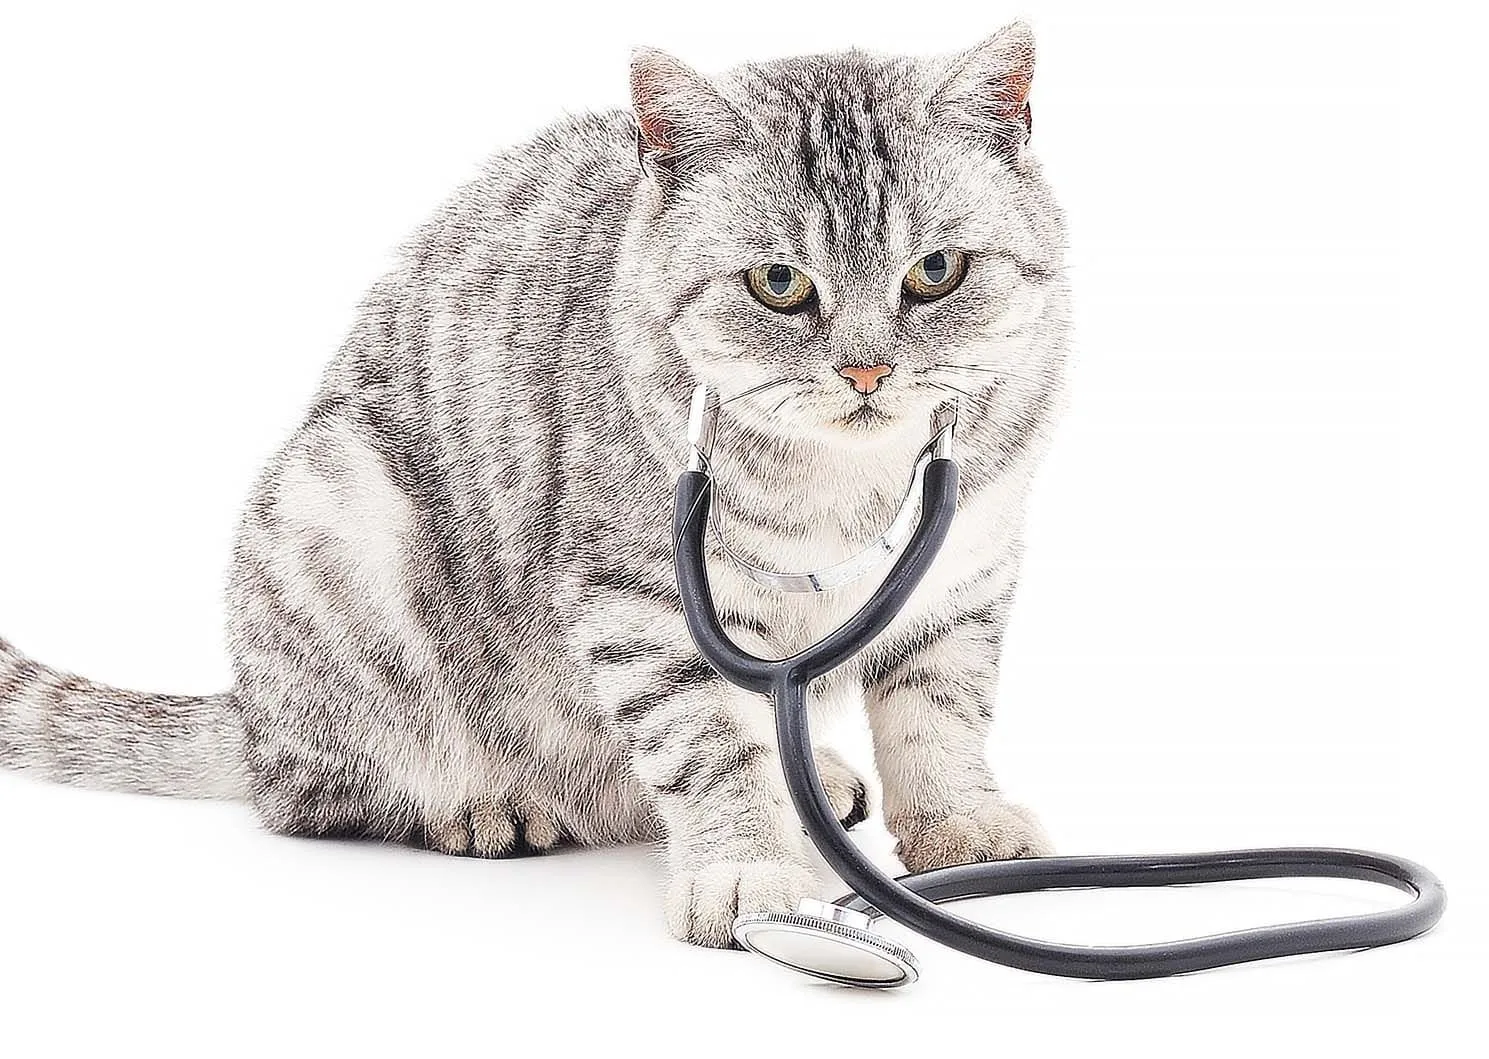 What to expect, cat in stethoscope